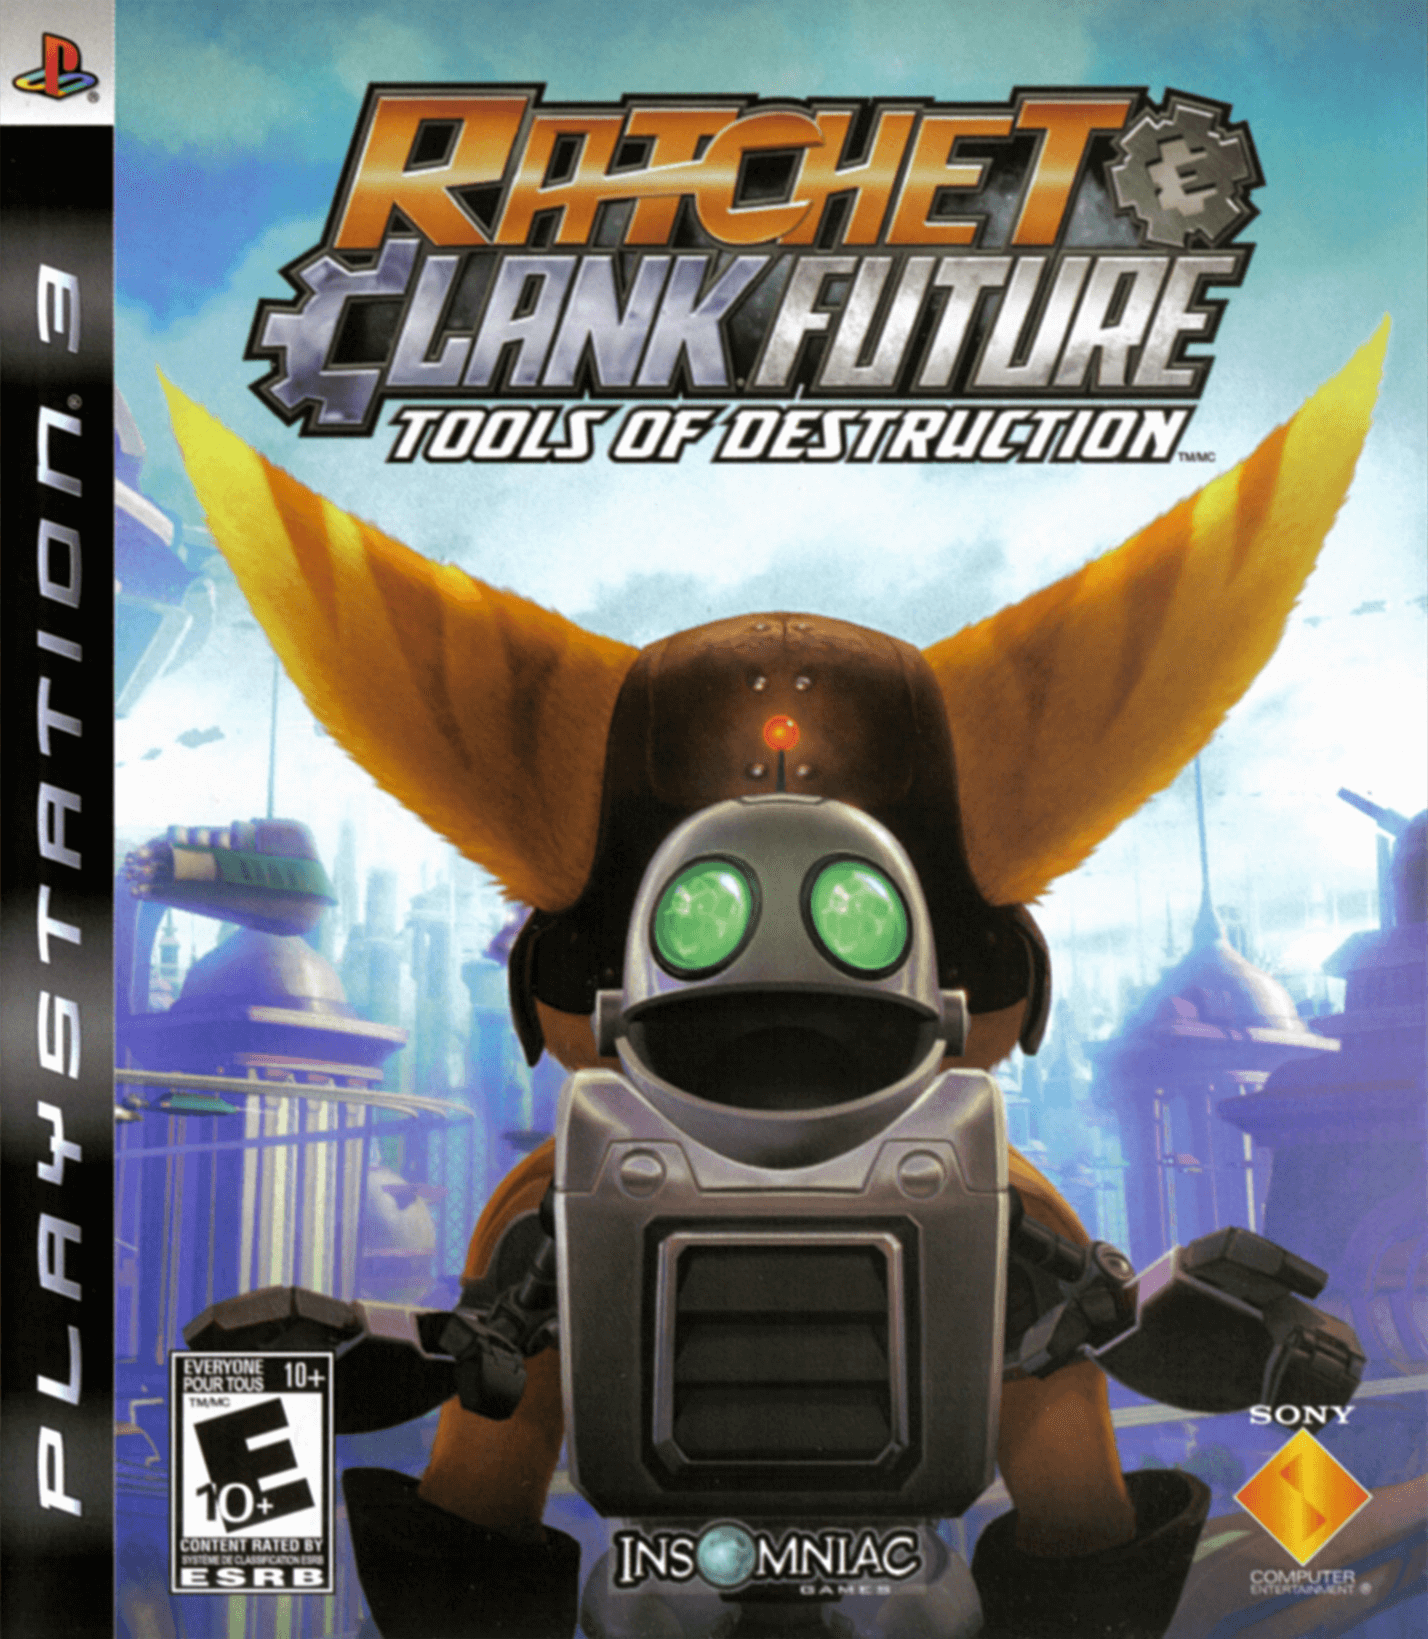 ratchet-clank-future-tools-of-destruction-ps3-game-rom-iso-download